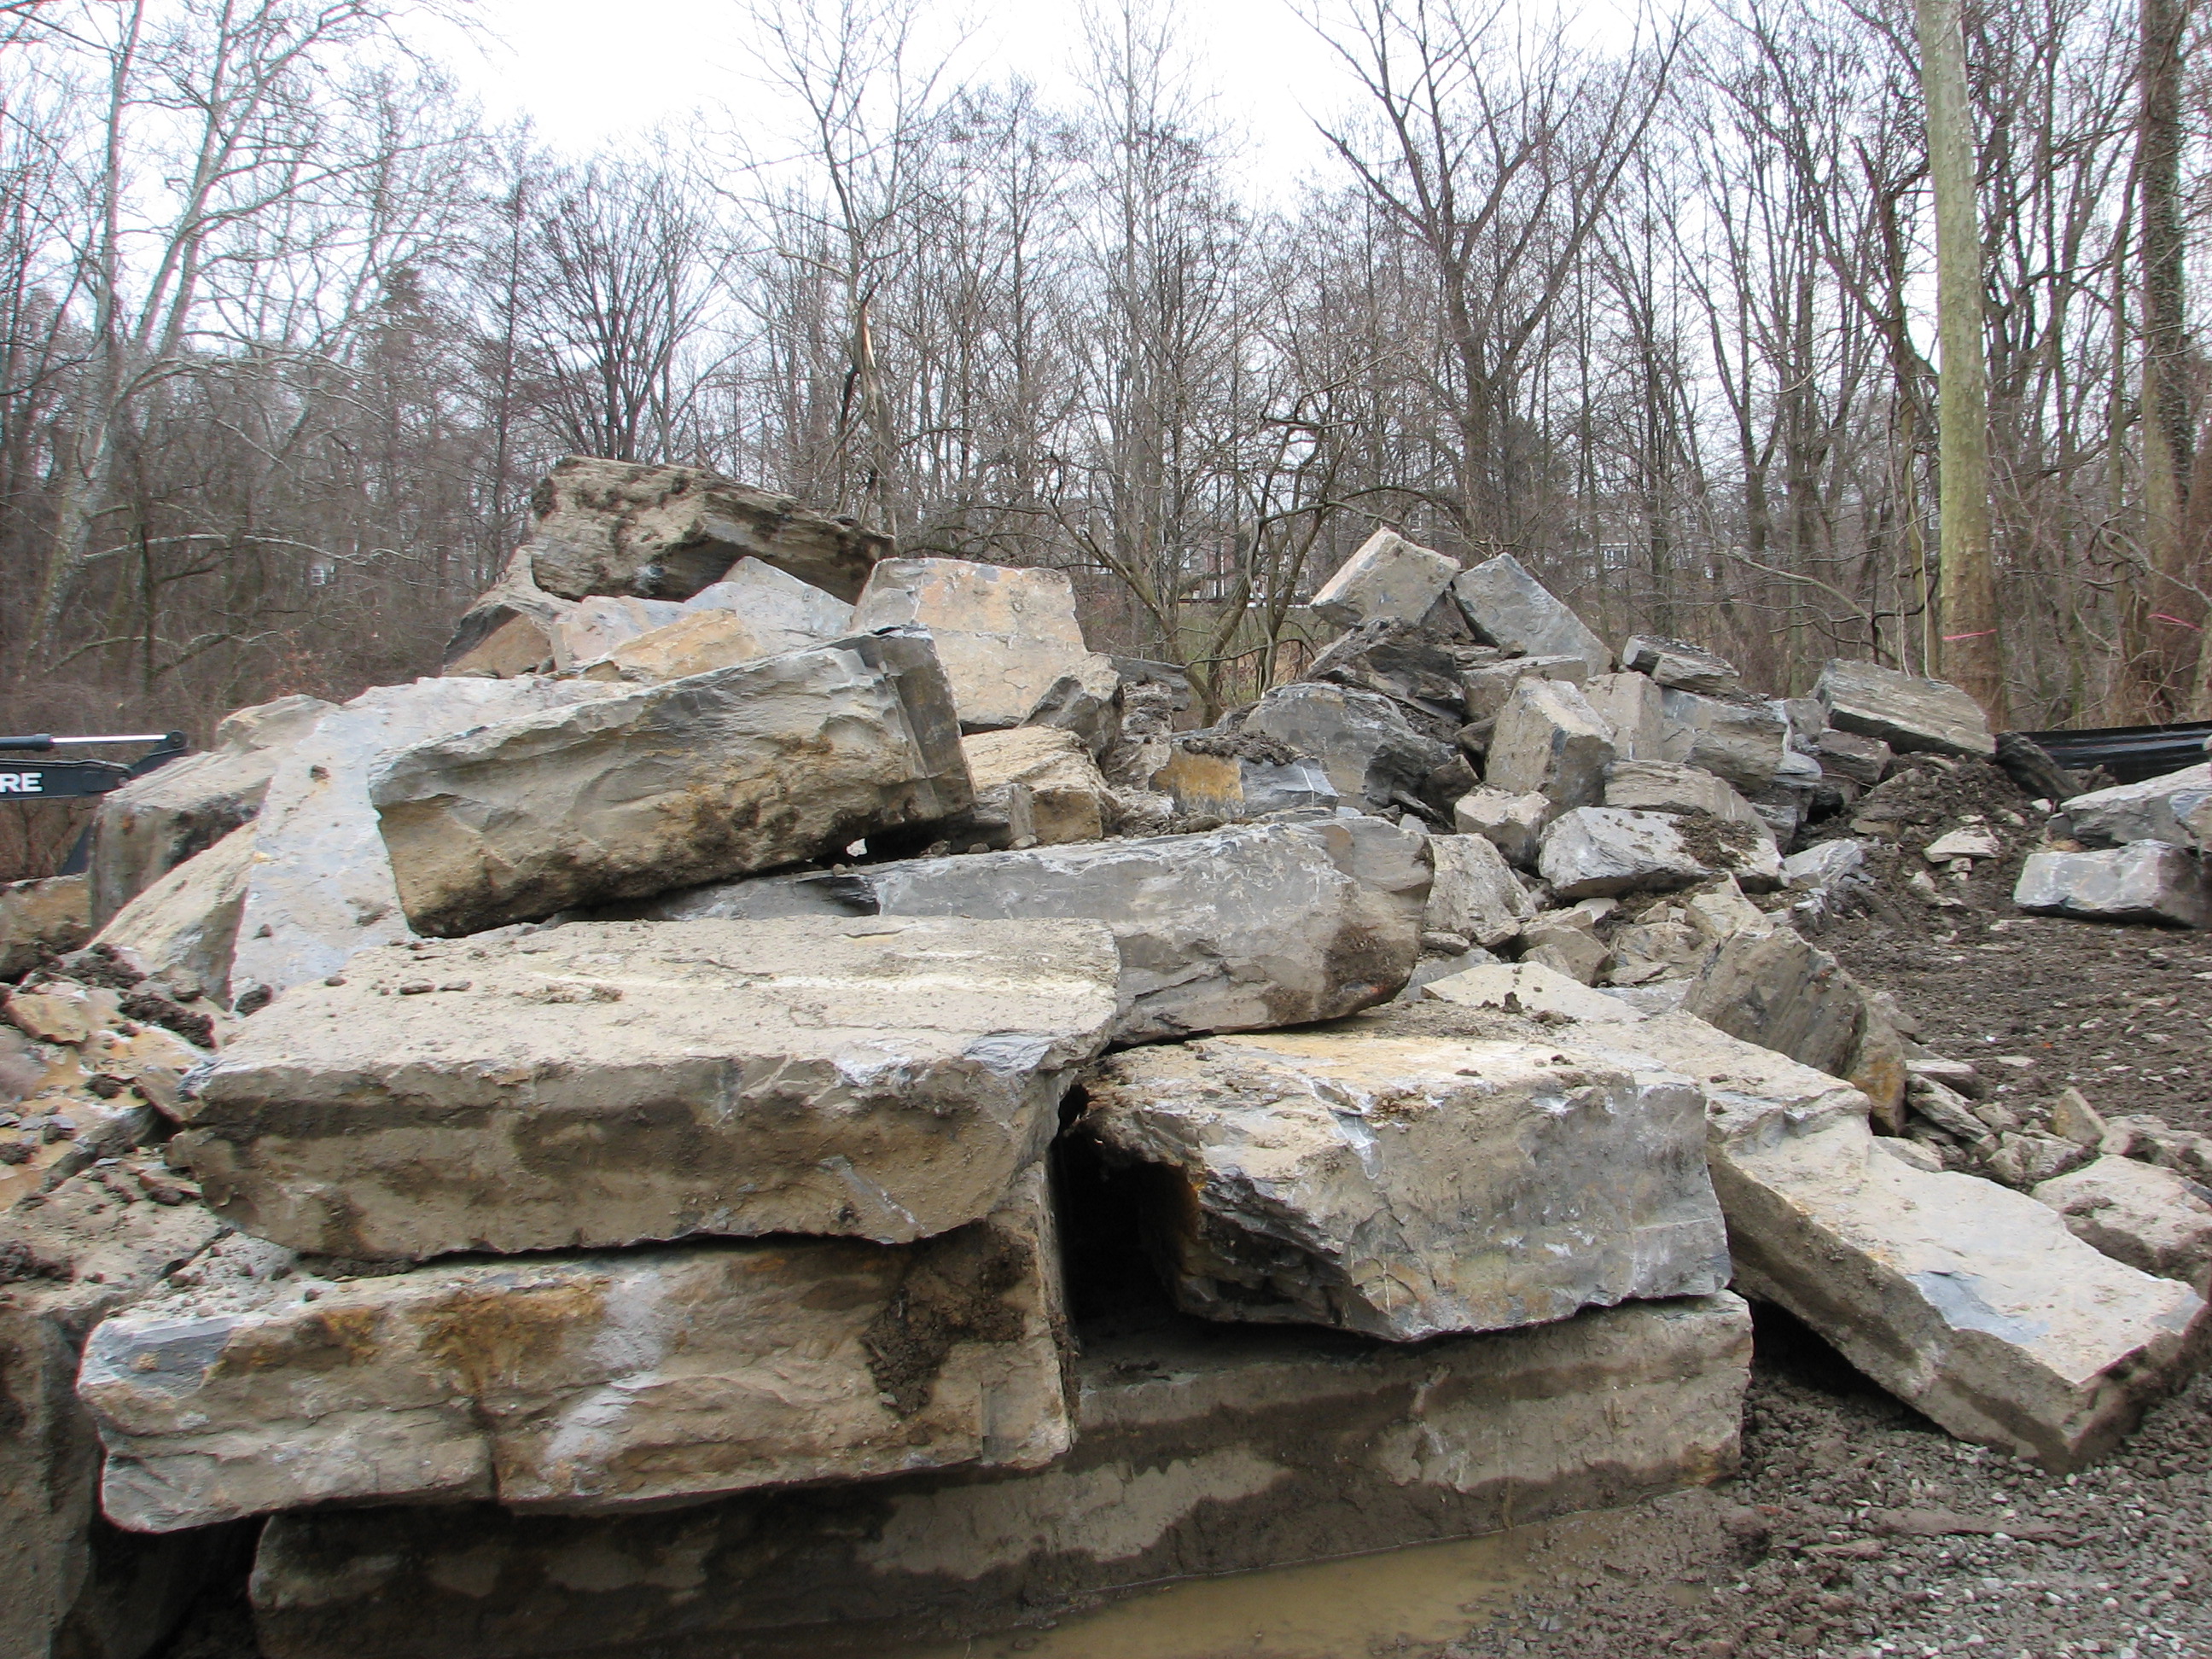 Large rocks that will be used to create a structure designed to prevent bank erosion at the new confluence of the east and west branches.